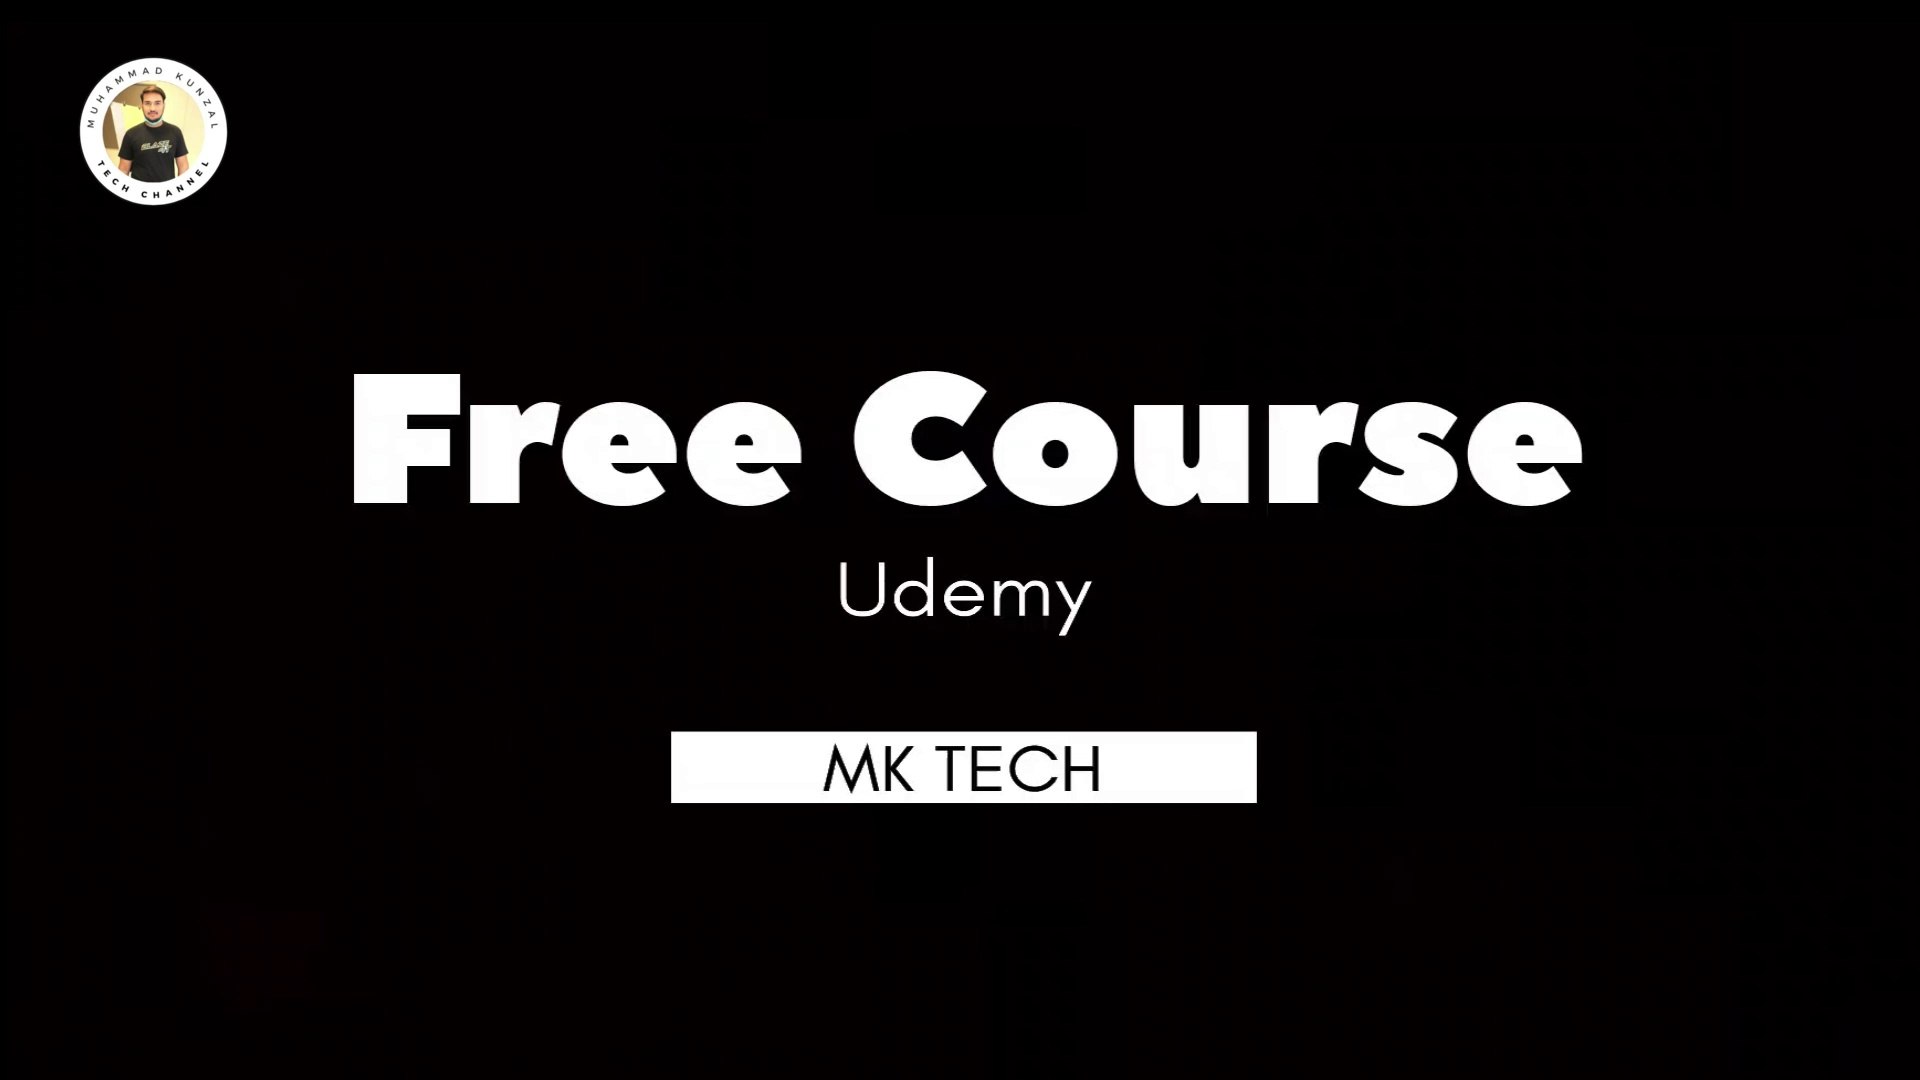 40+ FREE Online Courses with Certificates [UDEMY] - Lifetime